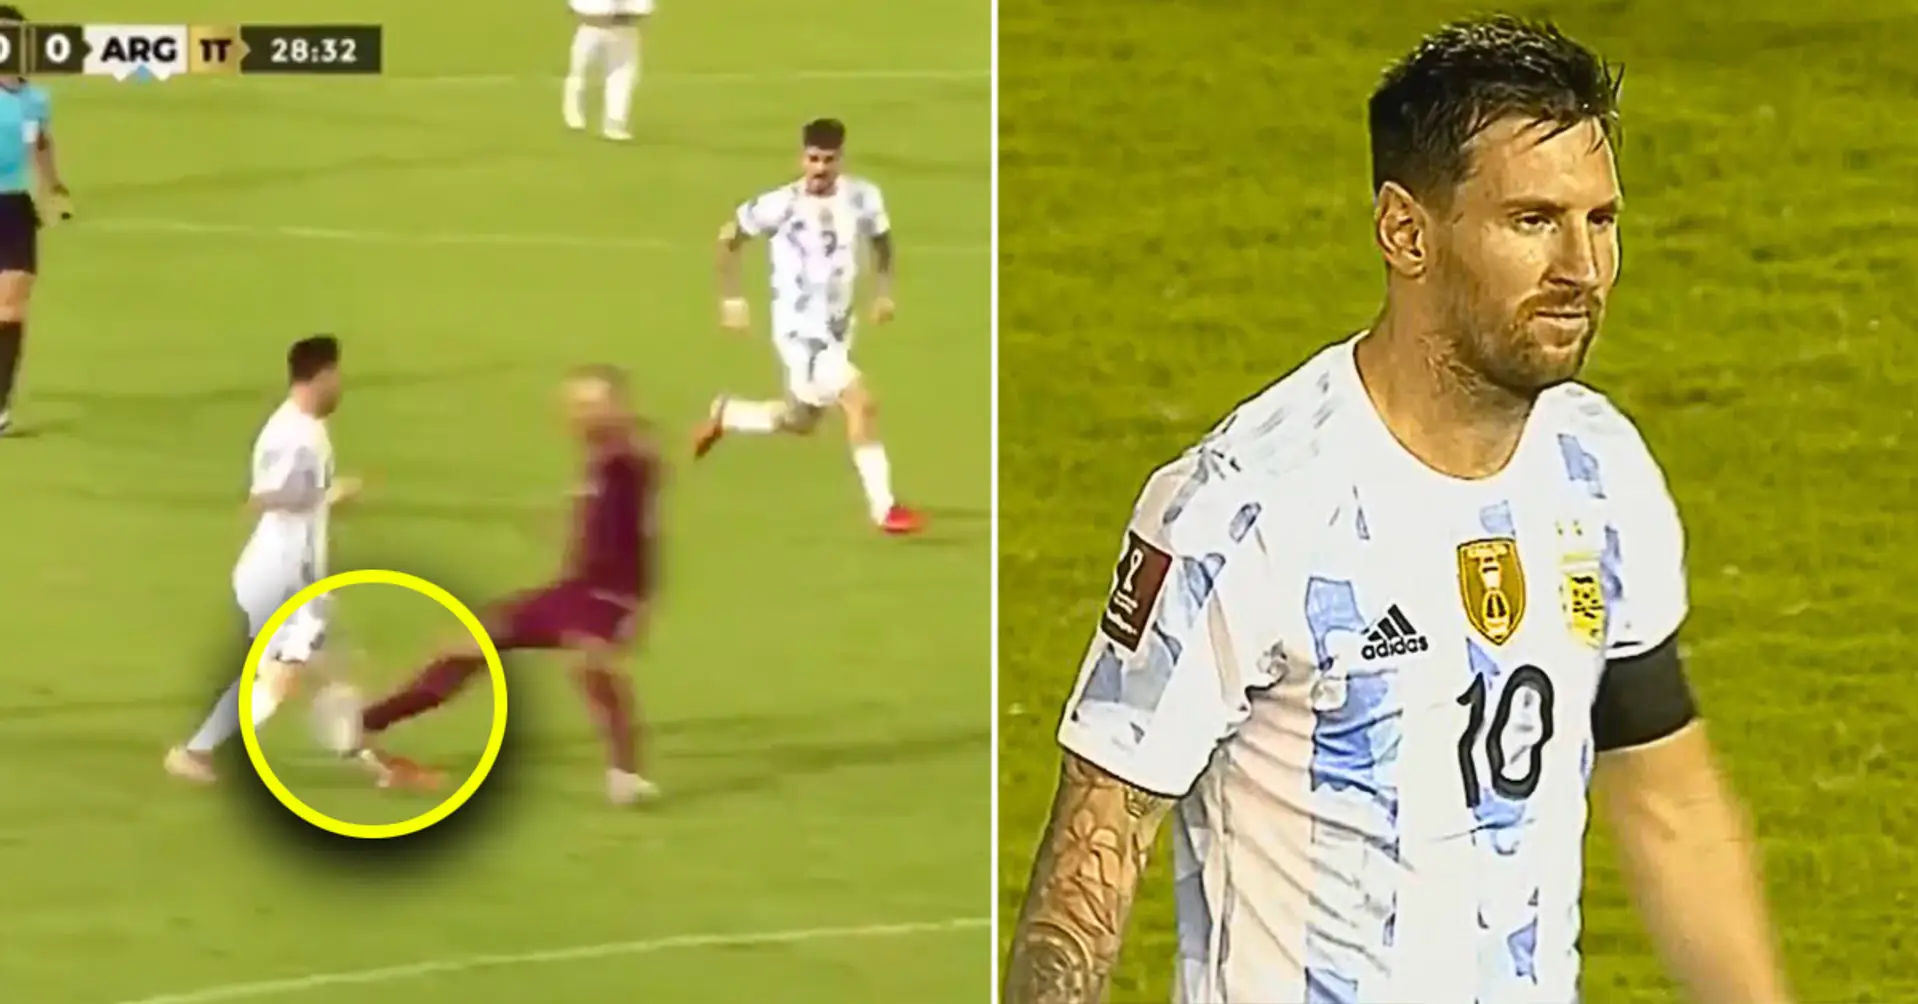 'Has to be banned from football': Venezuela player almost ends Messi’s career with brutal tackle